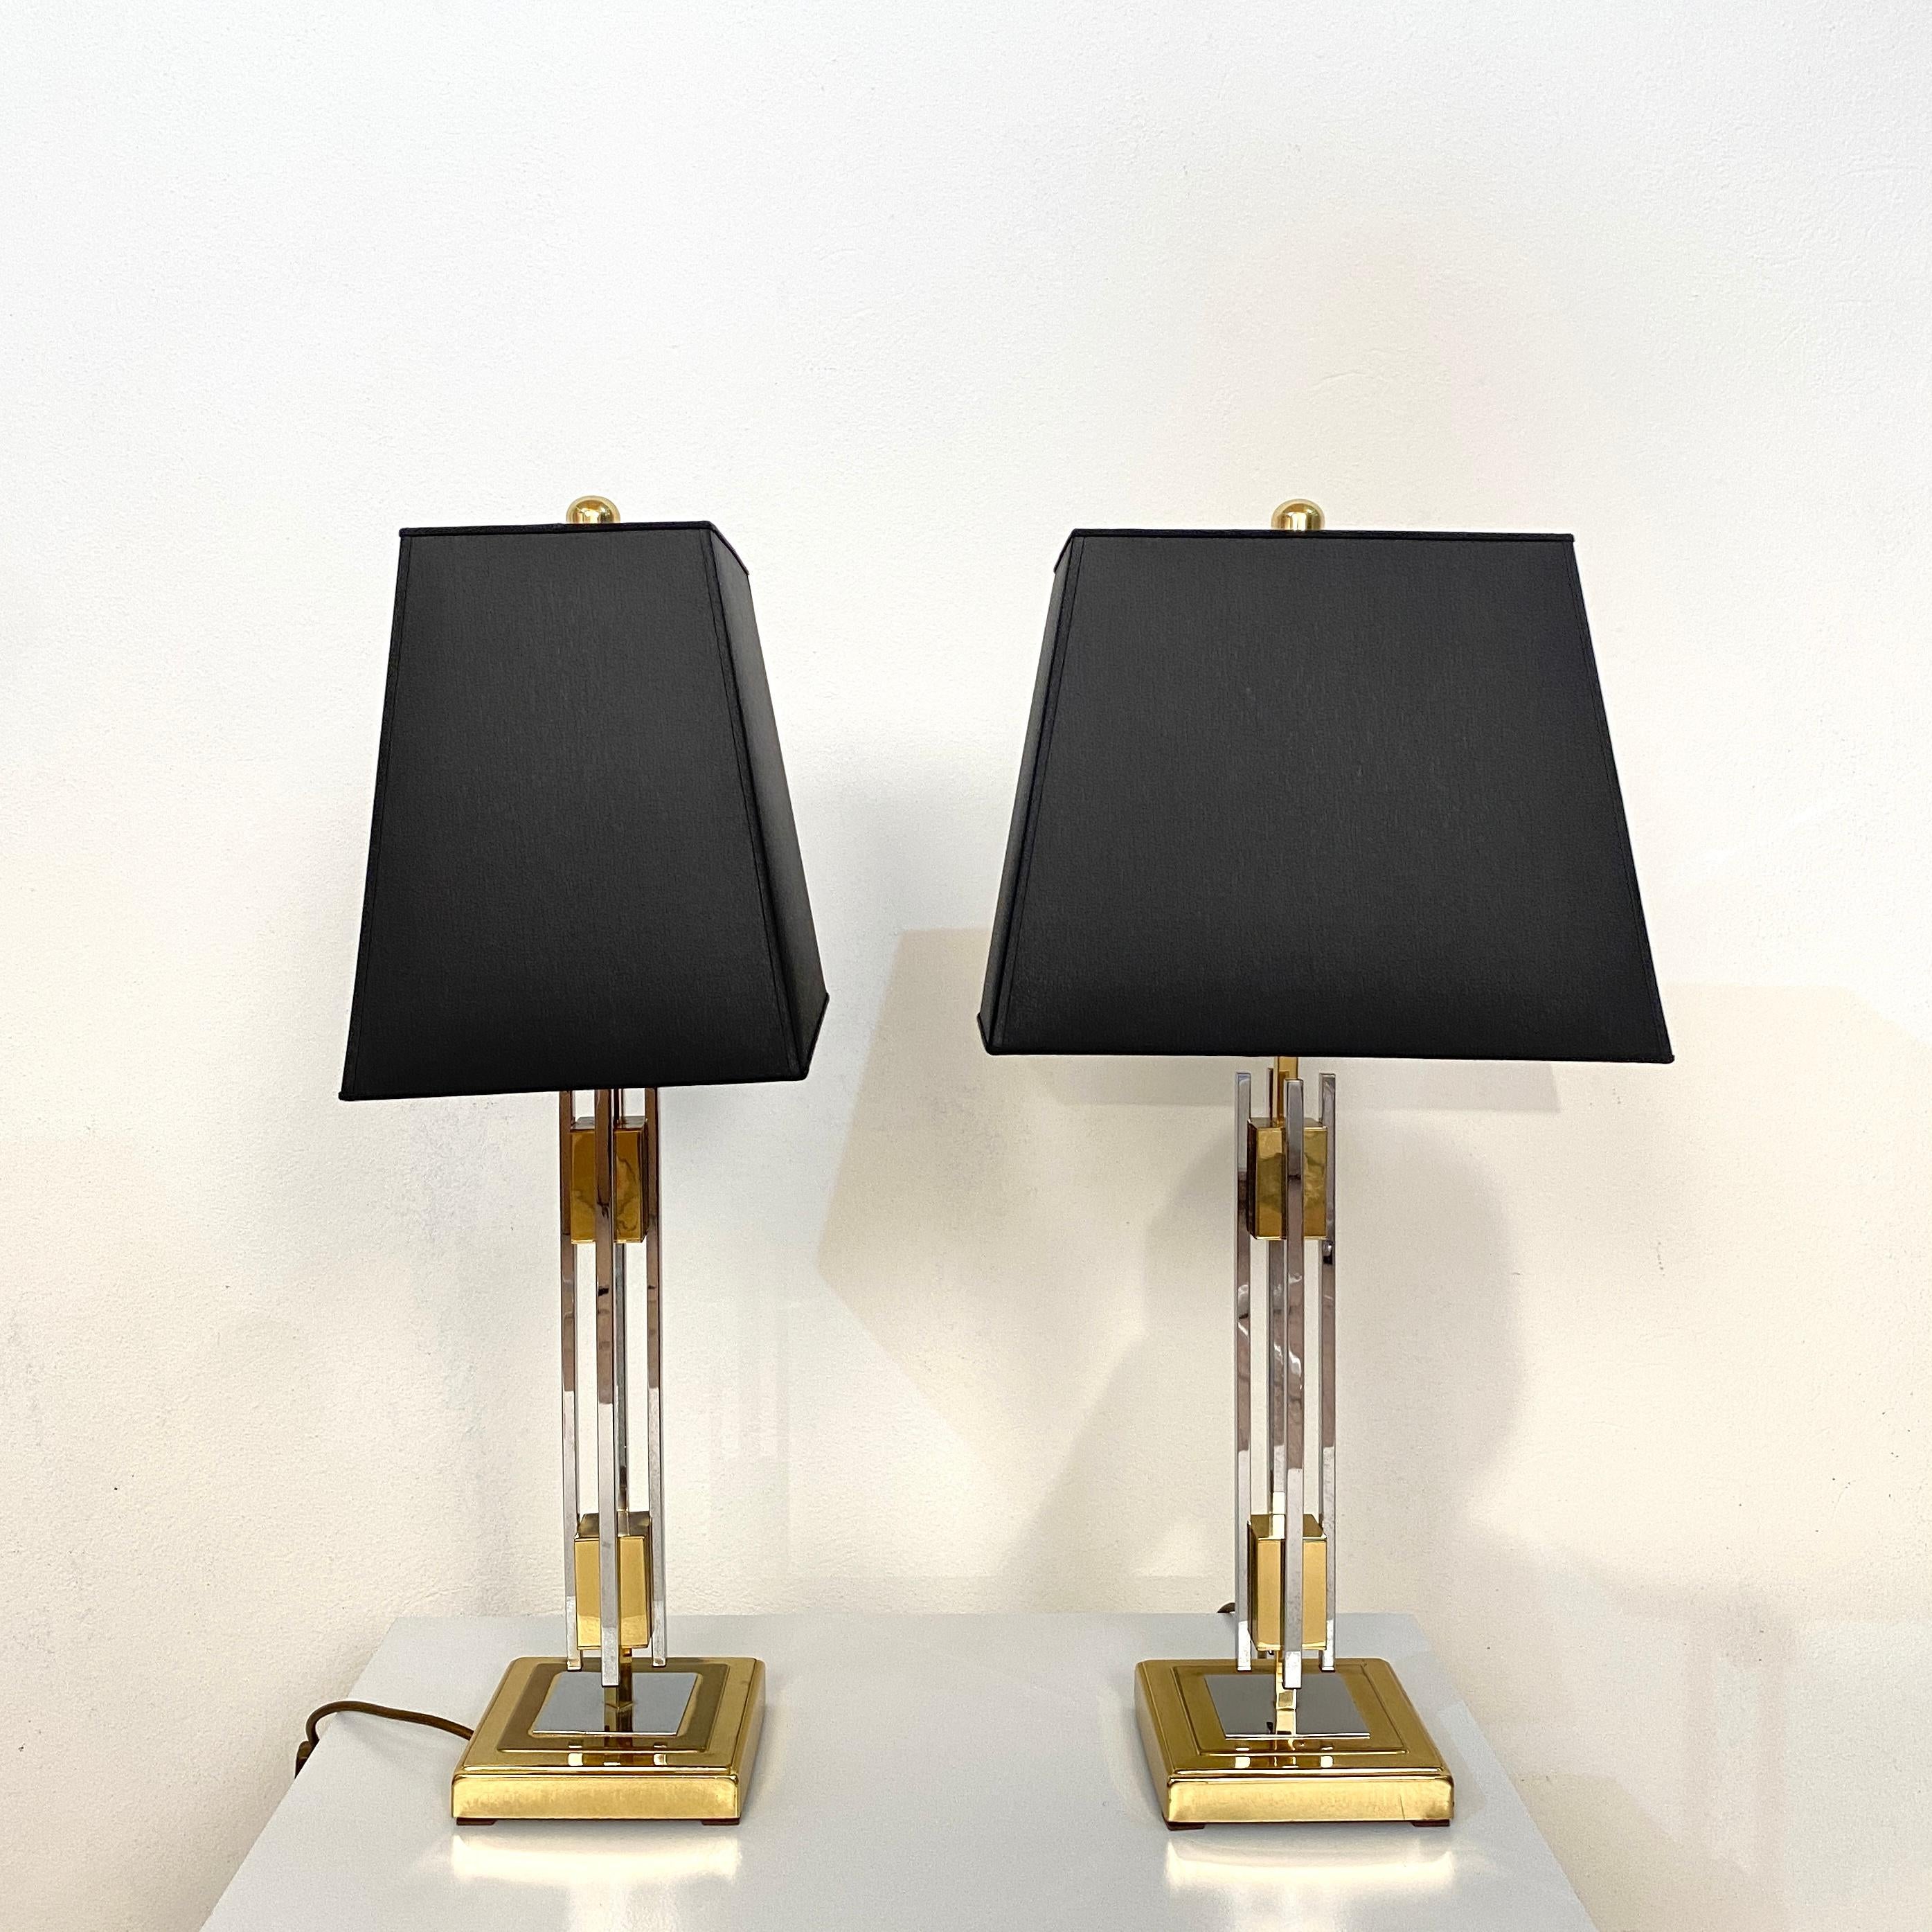 Italian Pair of Midcentury Gold and Chrome Table Lamps by Willy Rizzo, circa 1970